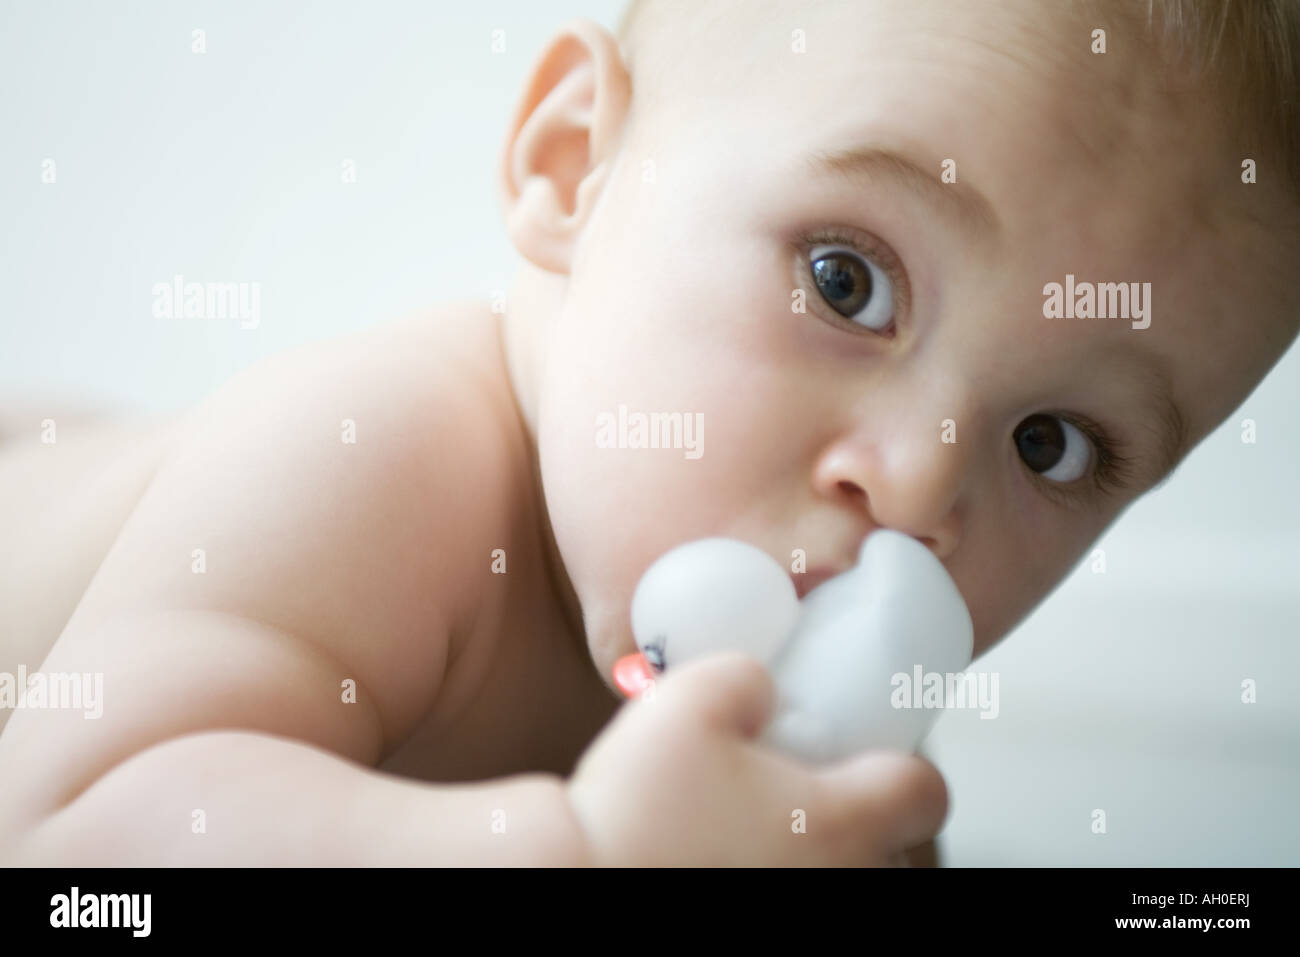 Baby looking at camera, wide eyes, holding rubber duck Stock Photo